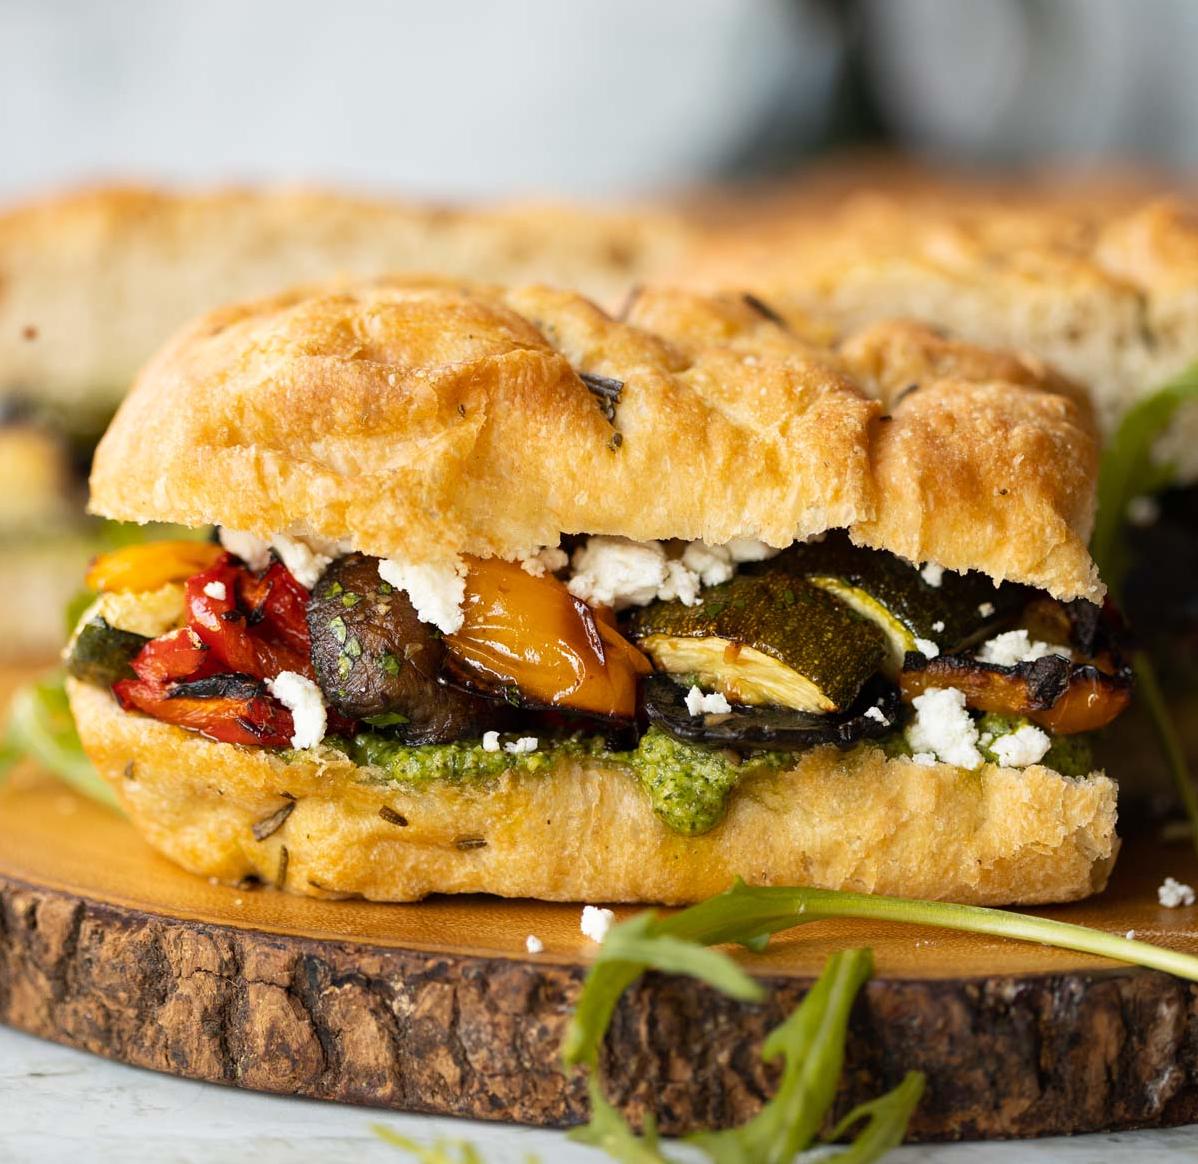  Crispy bread and a medley of vibrant veggies? Yes please!